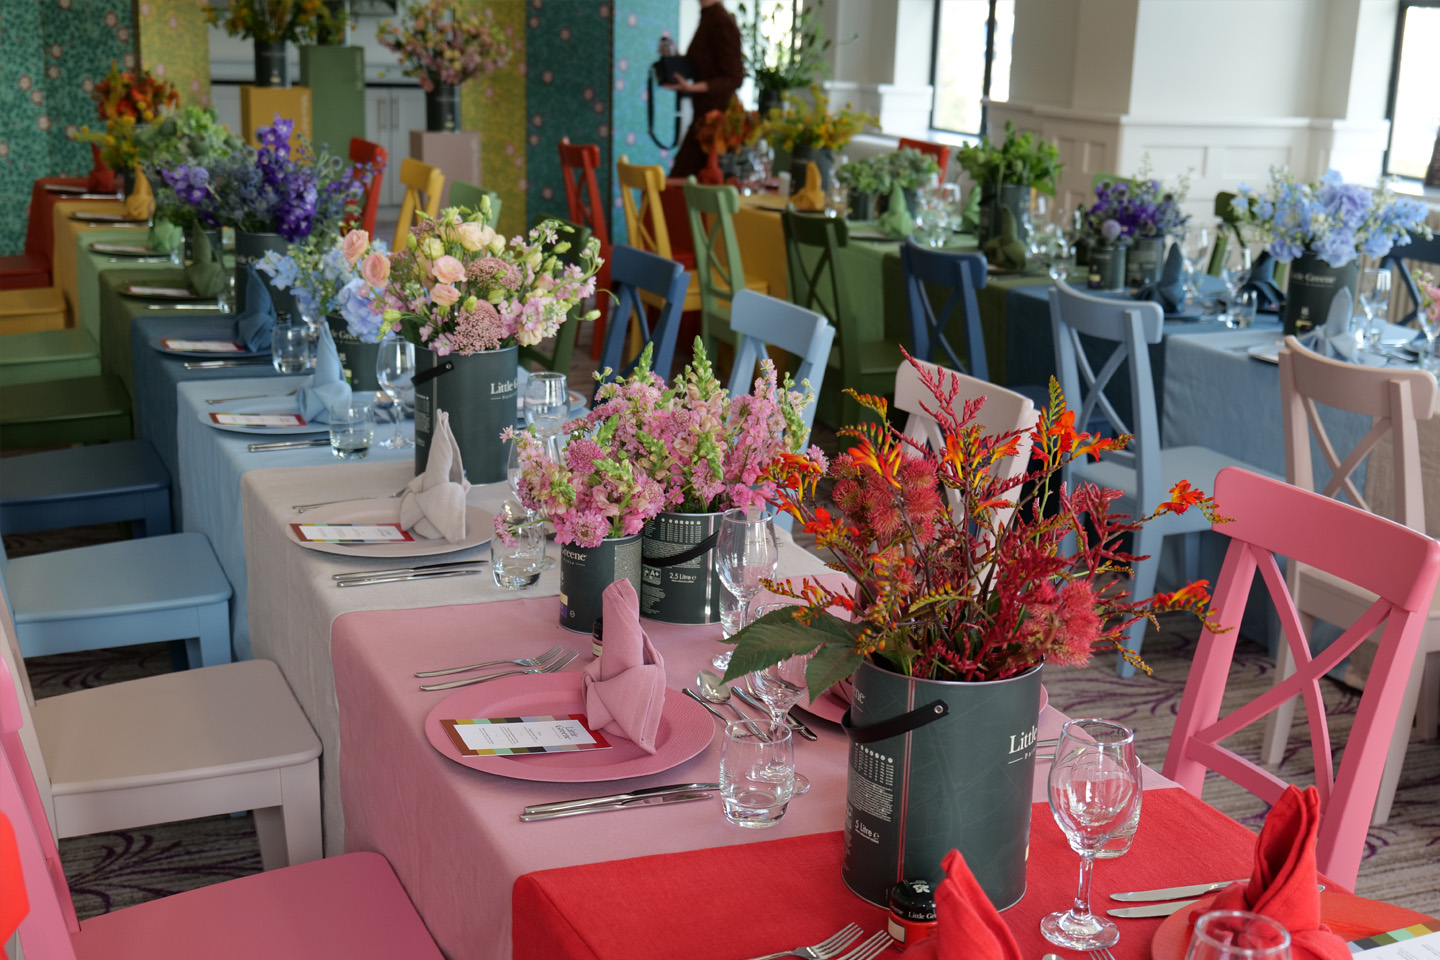 Long tables with Little Greene paint tins holding flowers, along with multi-colored tablecloths, chairs and plates.